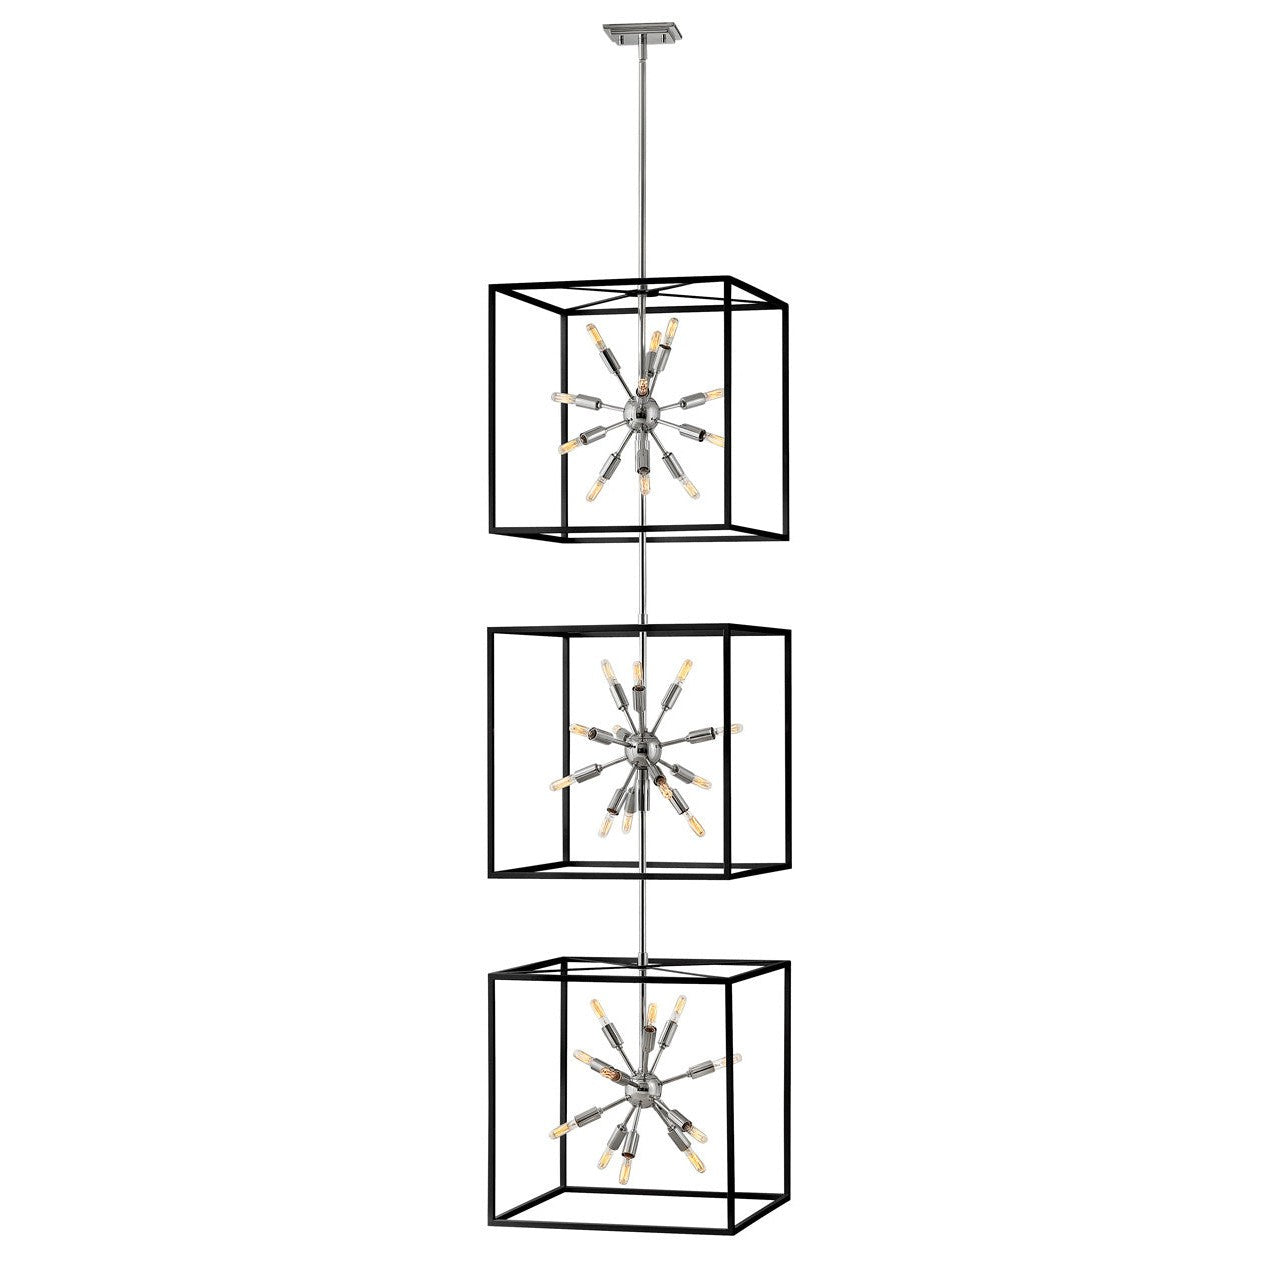 Hinkley Aros 46318BLK-PN Pendant Light - Black with Polished Nickel accents